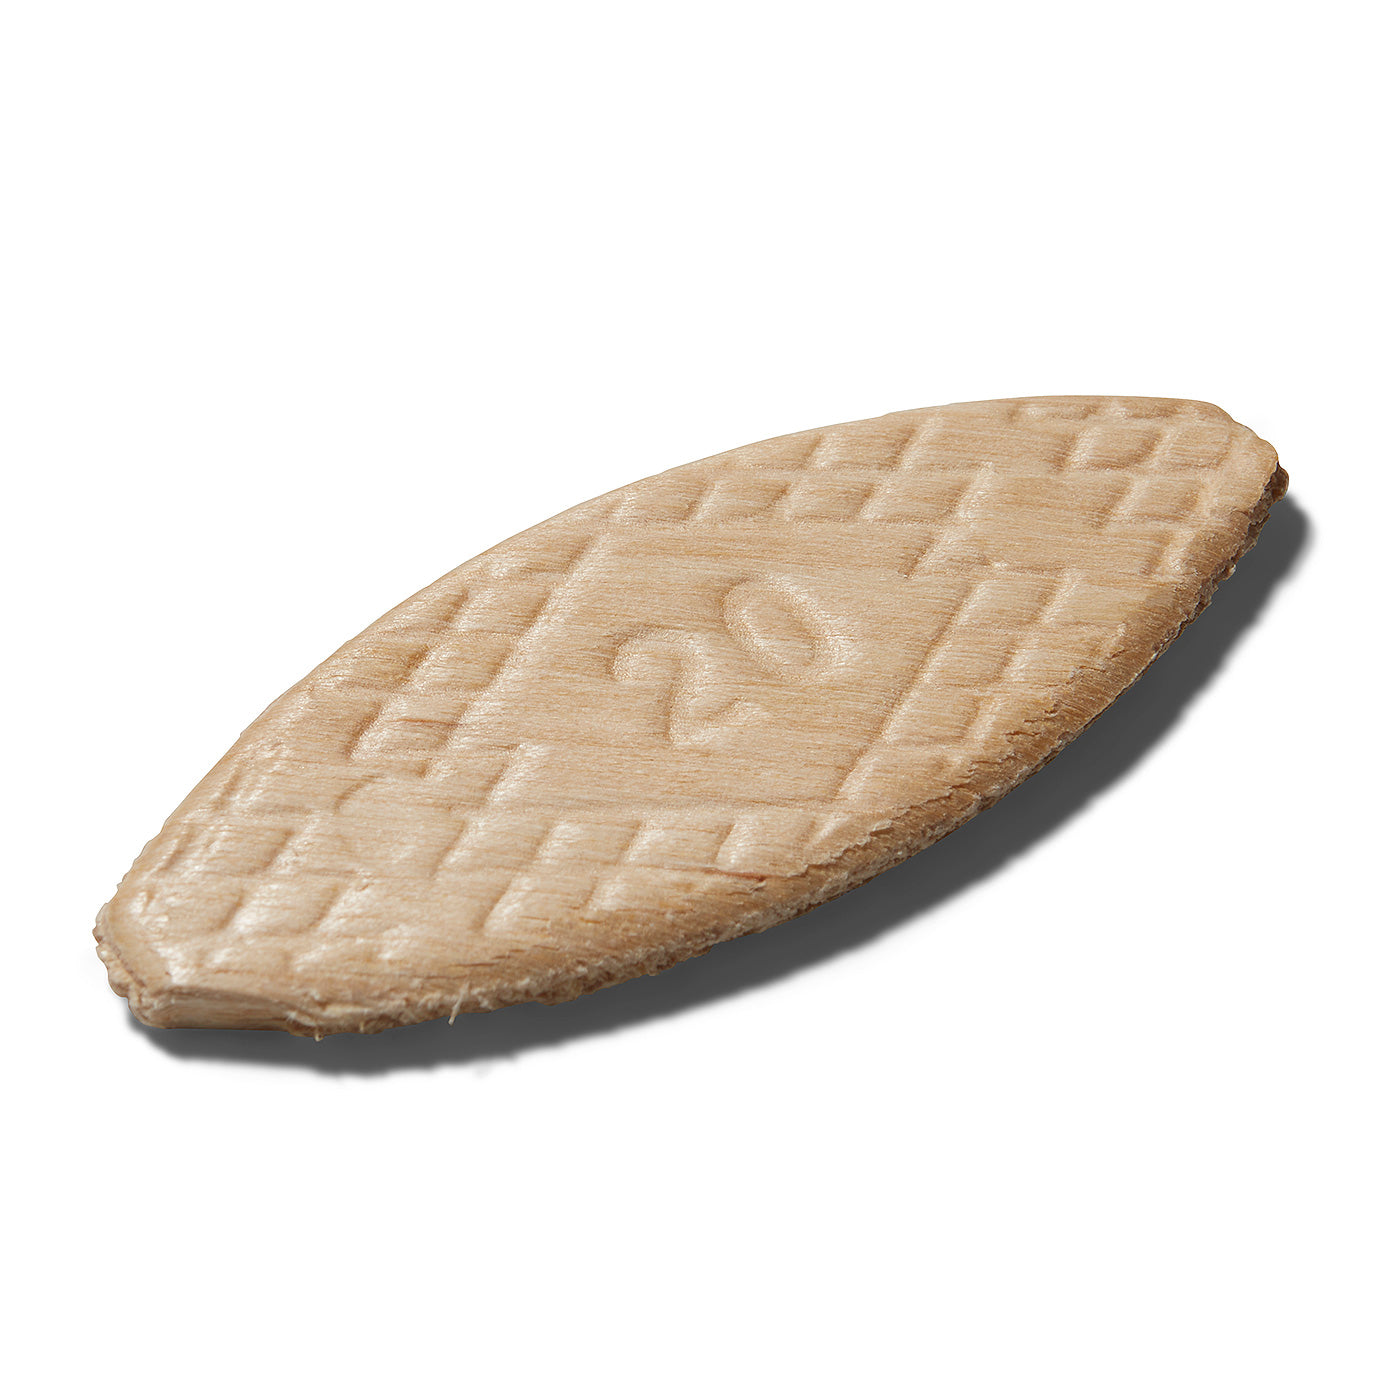 Biscuits - No 20 - Pack of 250